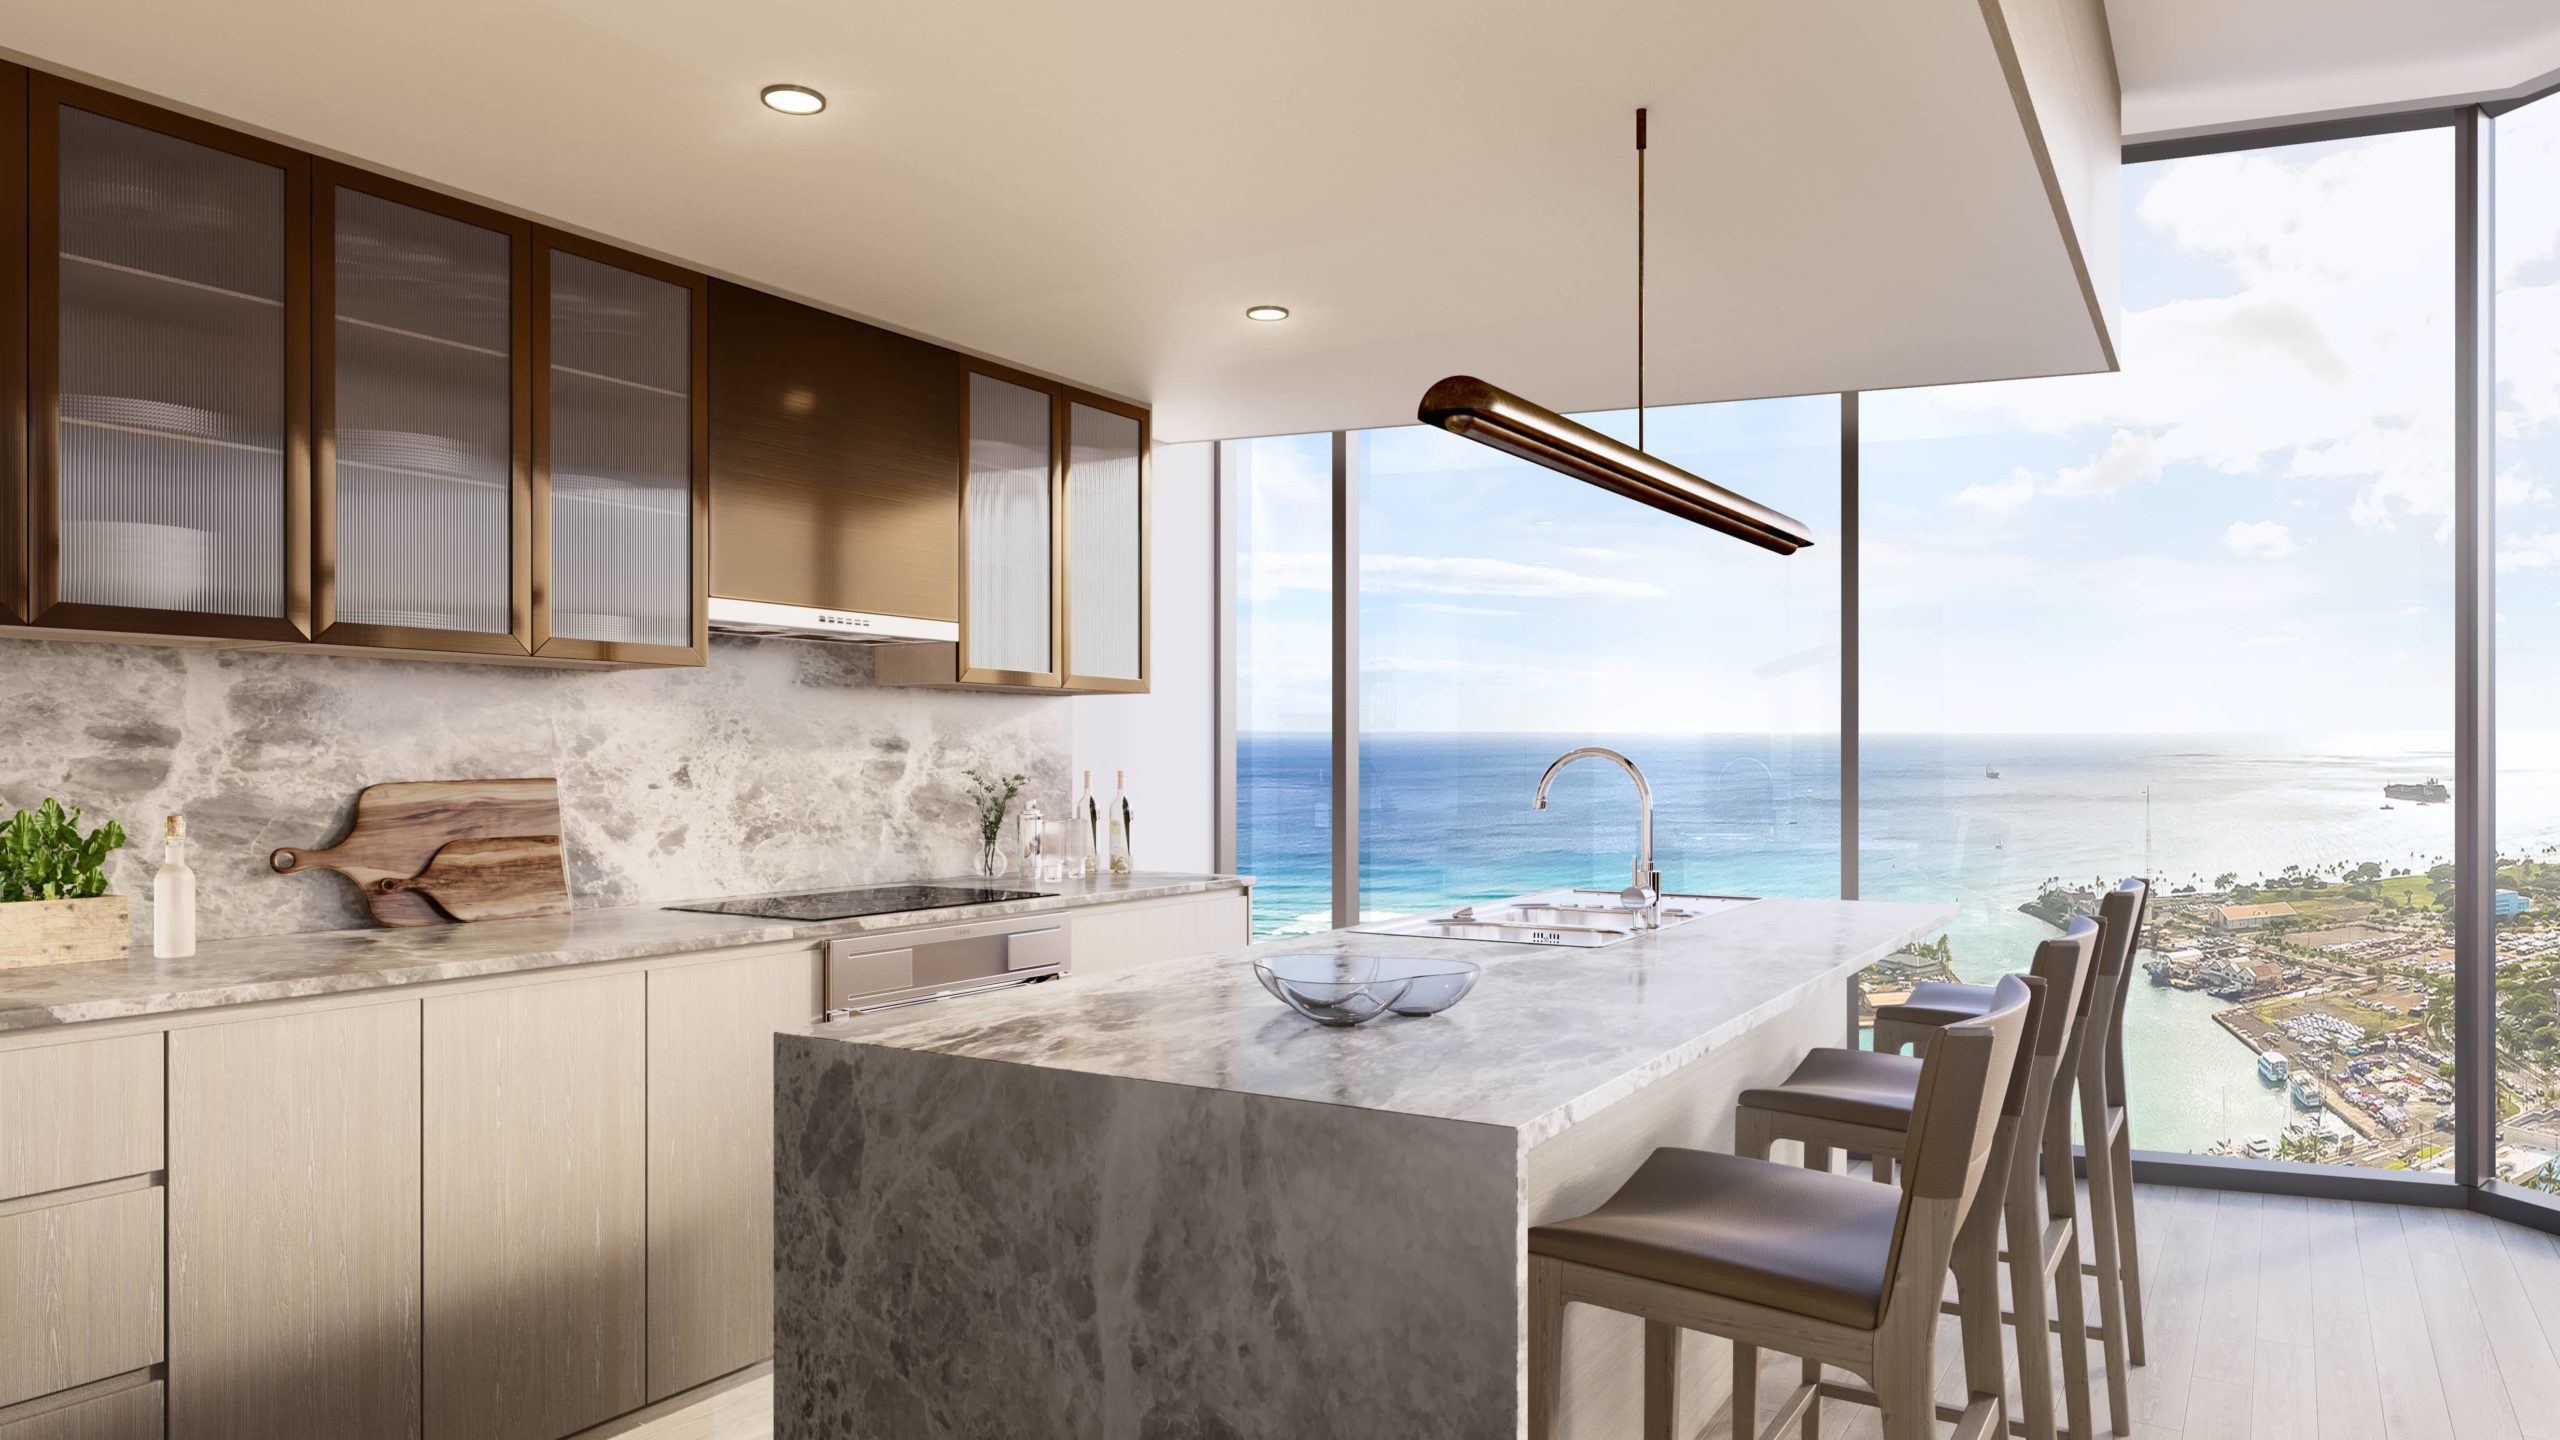 Corner kitchen with neutral countertops and cabinetry and an ocean view